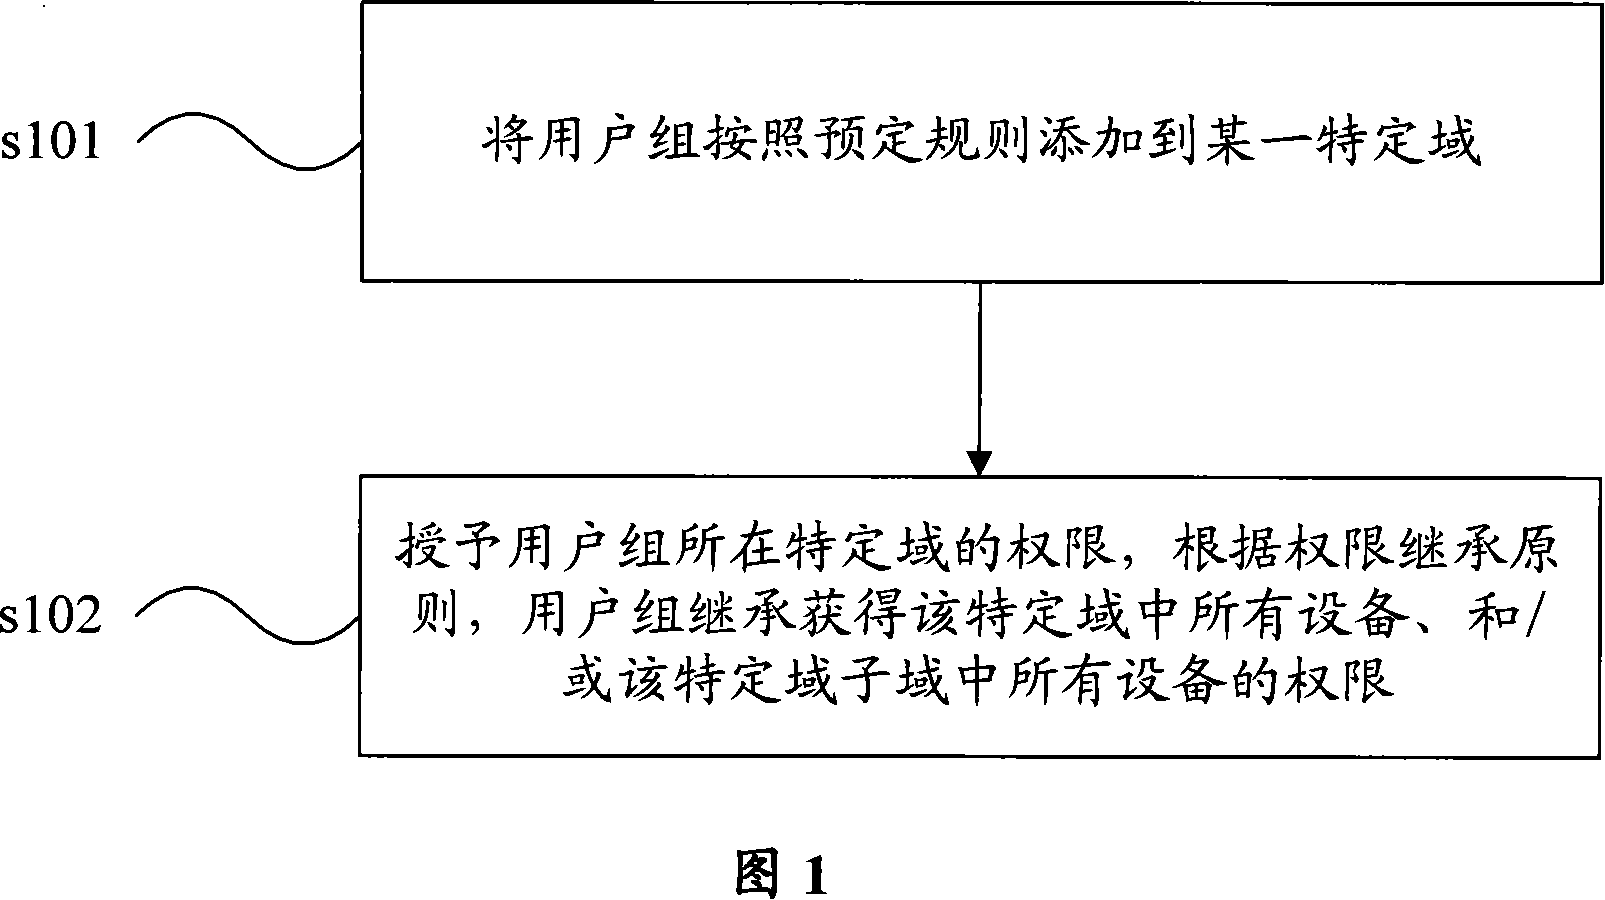 Authority configuring method and apparatus